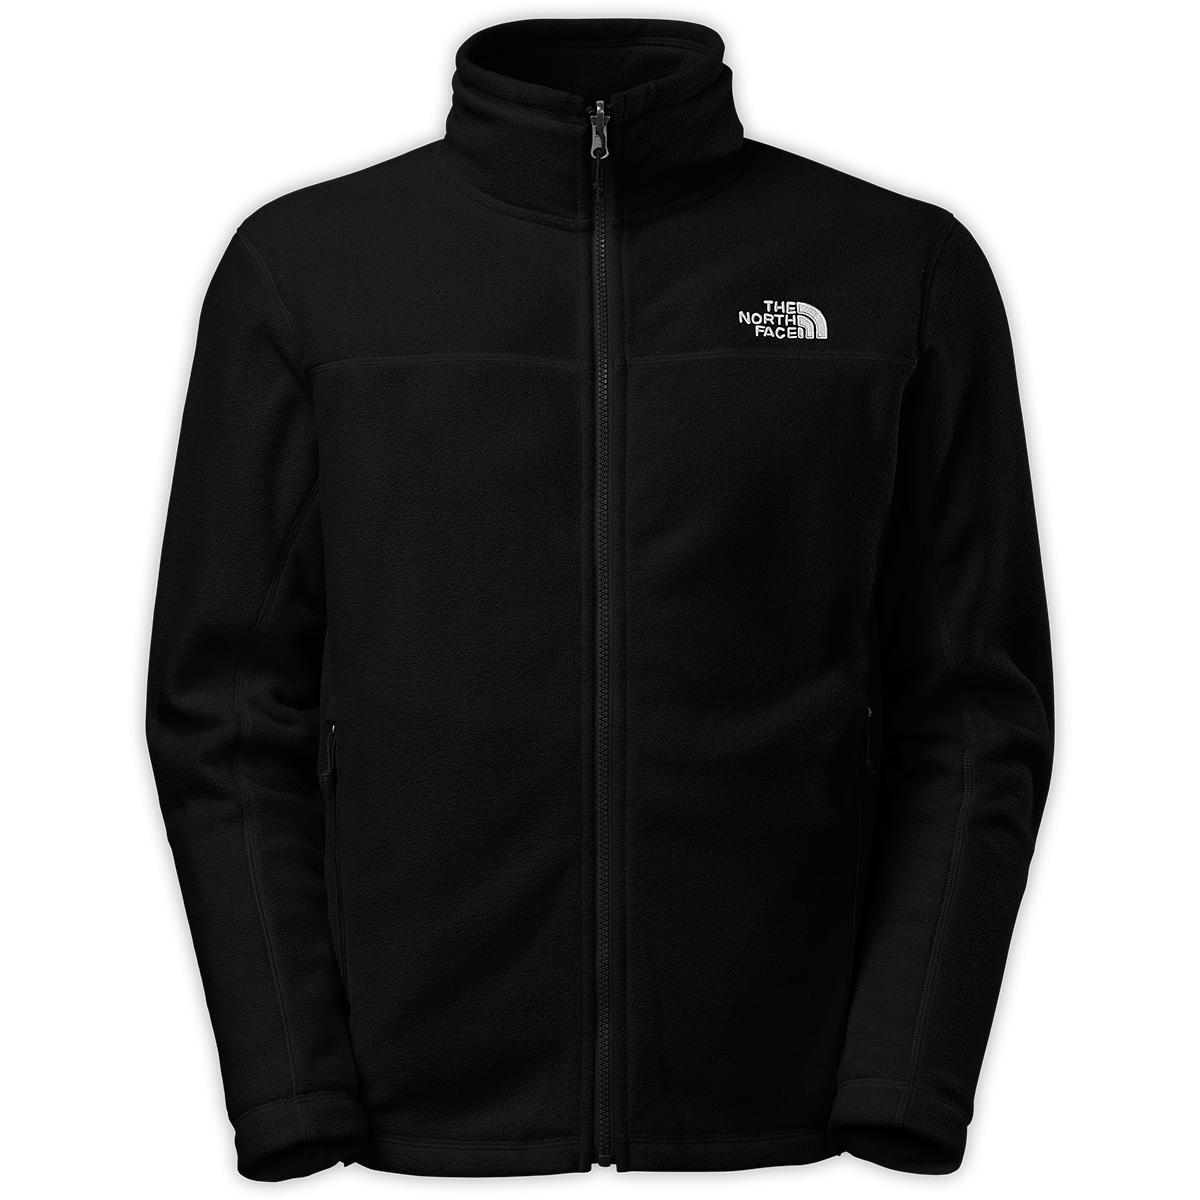 north face men's atlas triclimate jacket